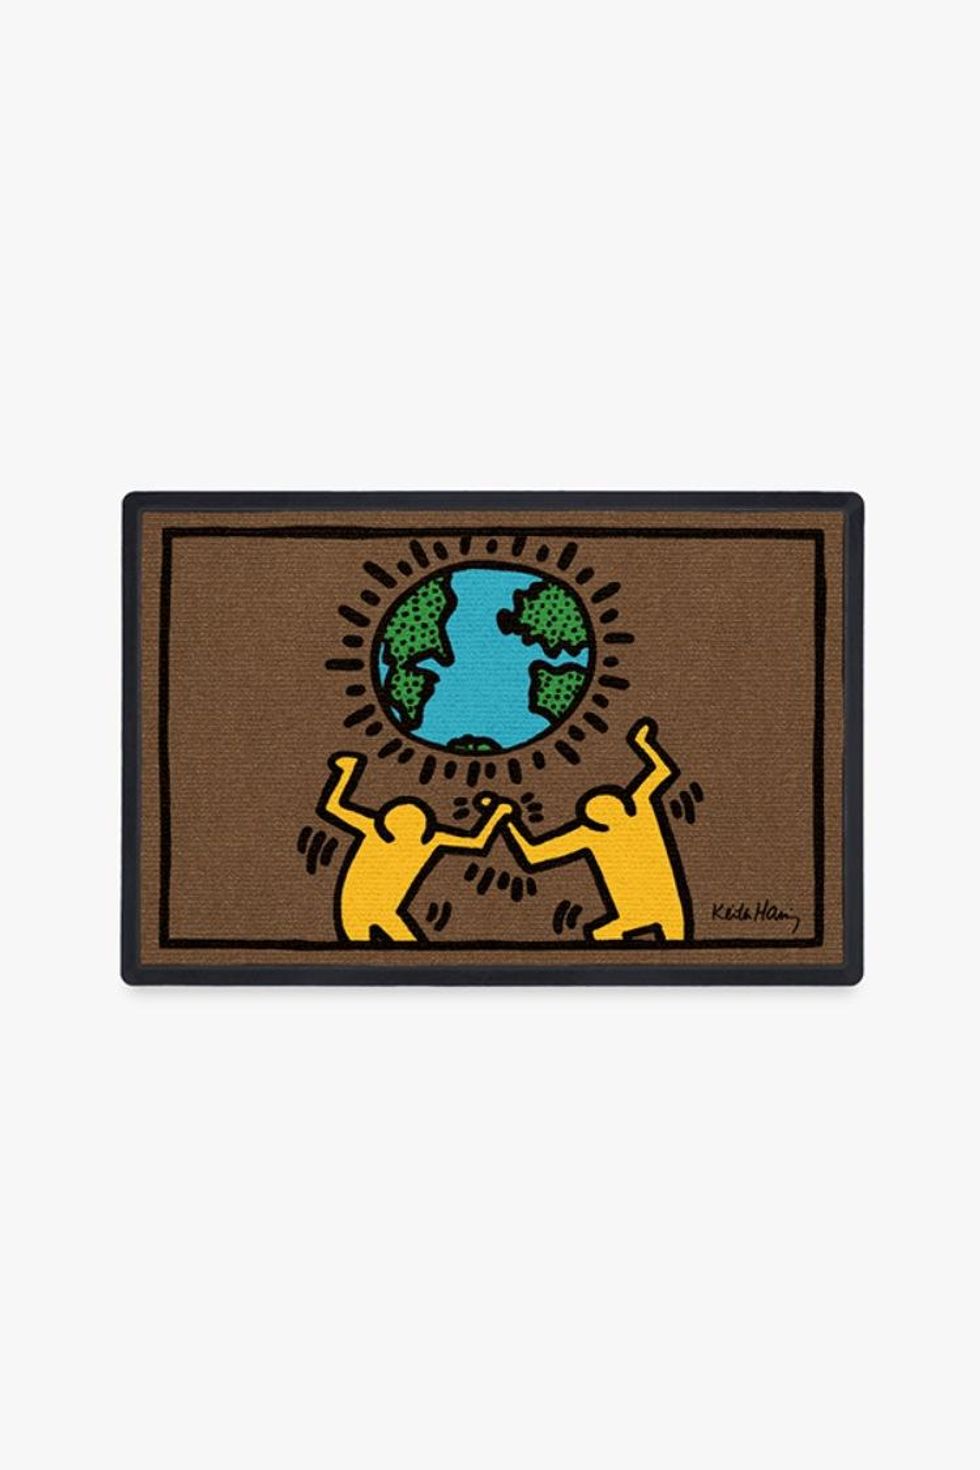 keith-haring-earth-day-a-rc-kh005-dm23.jpg